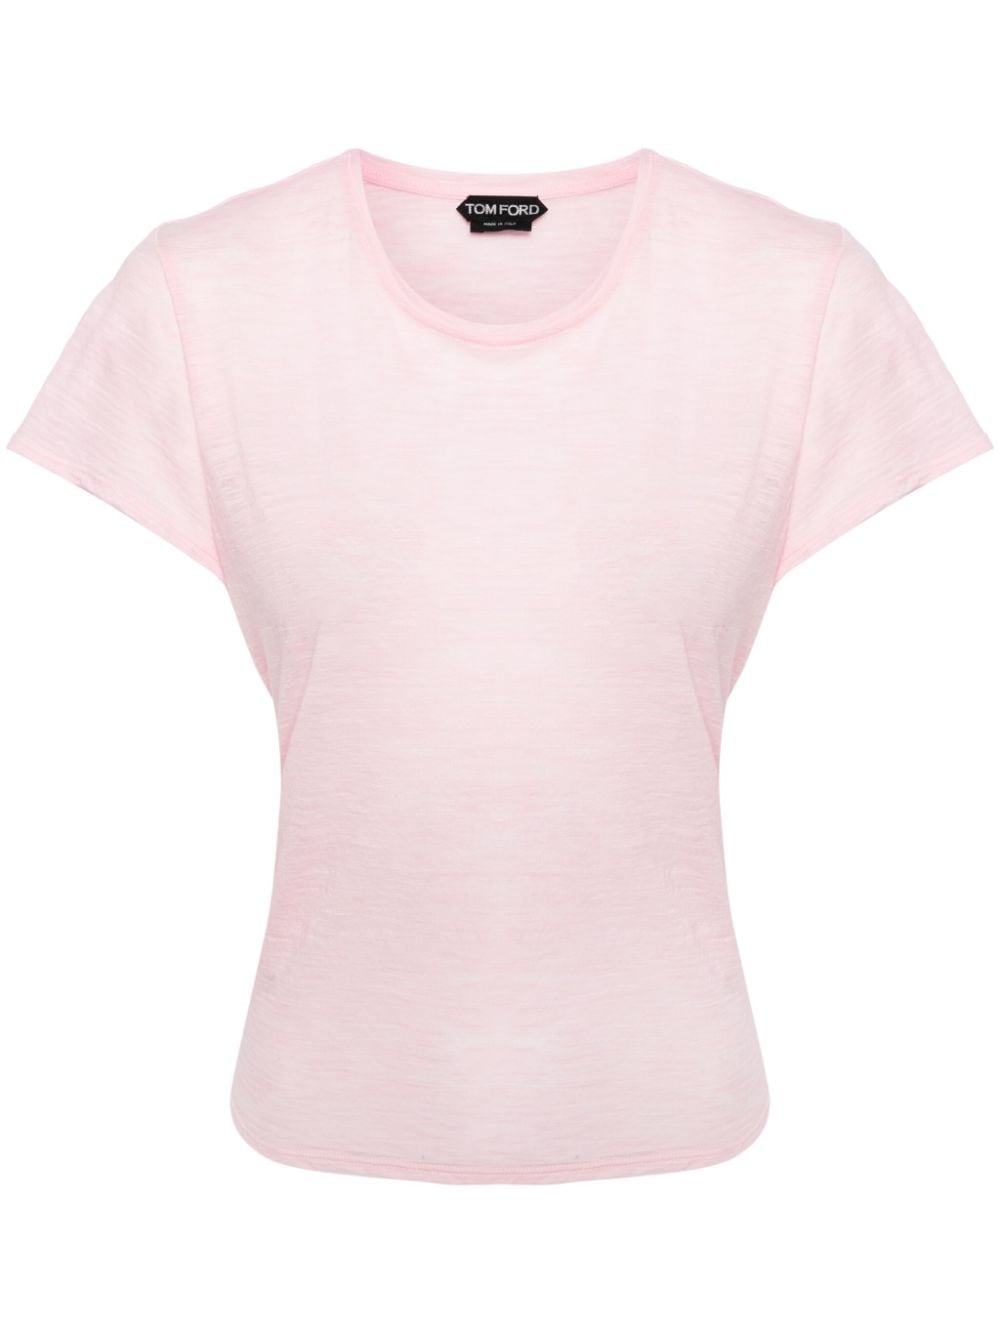 TOM FORD Jersey-T-Shirt - Rosa von TOM FORD